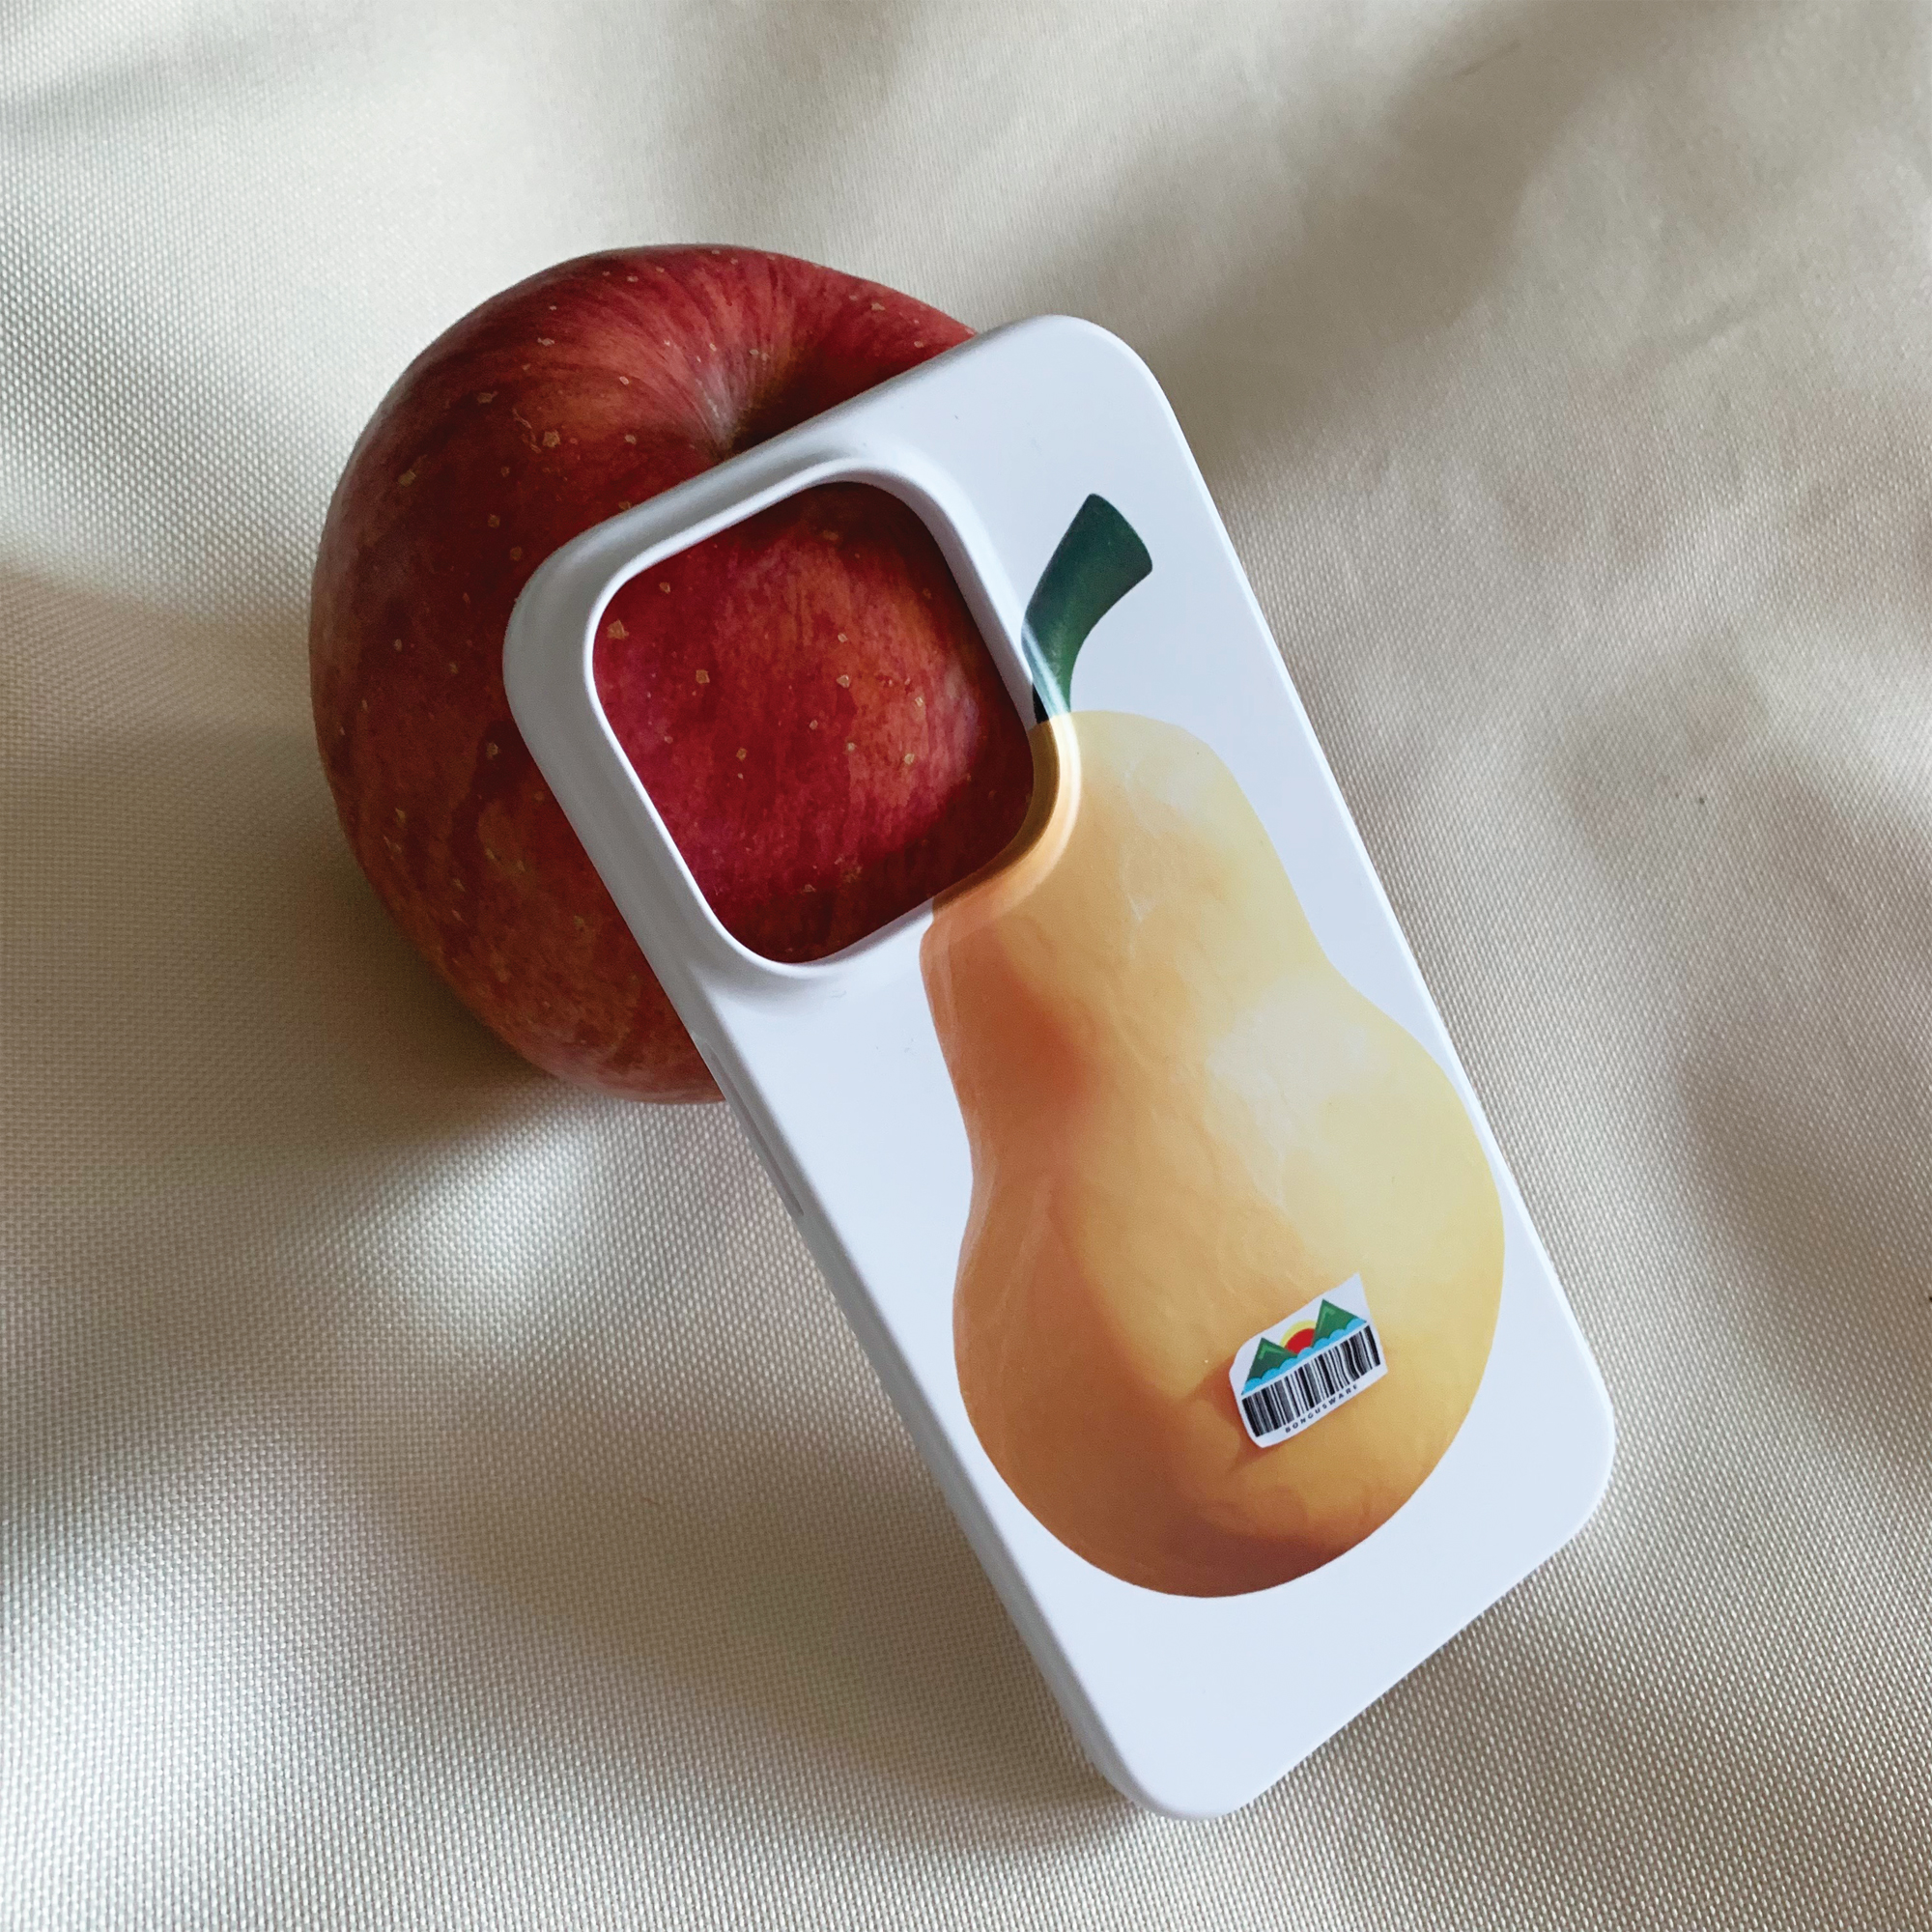 Buy some fruit! #Pear case